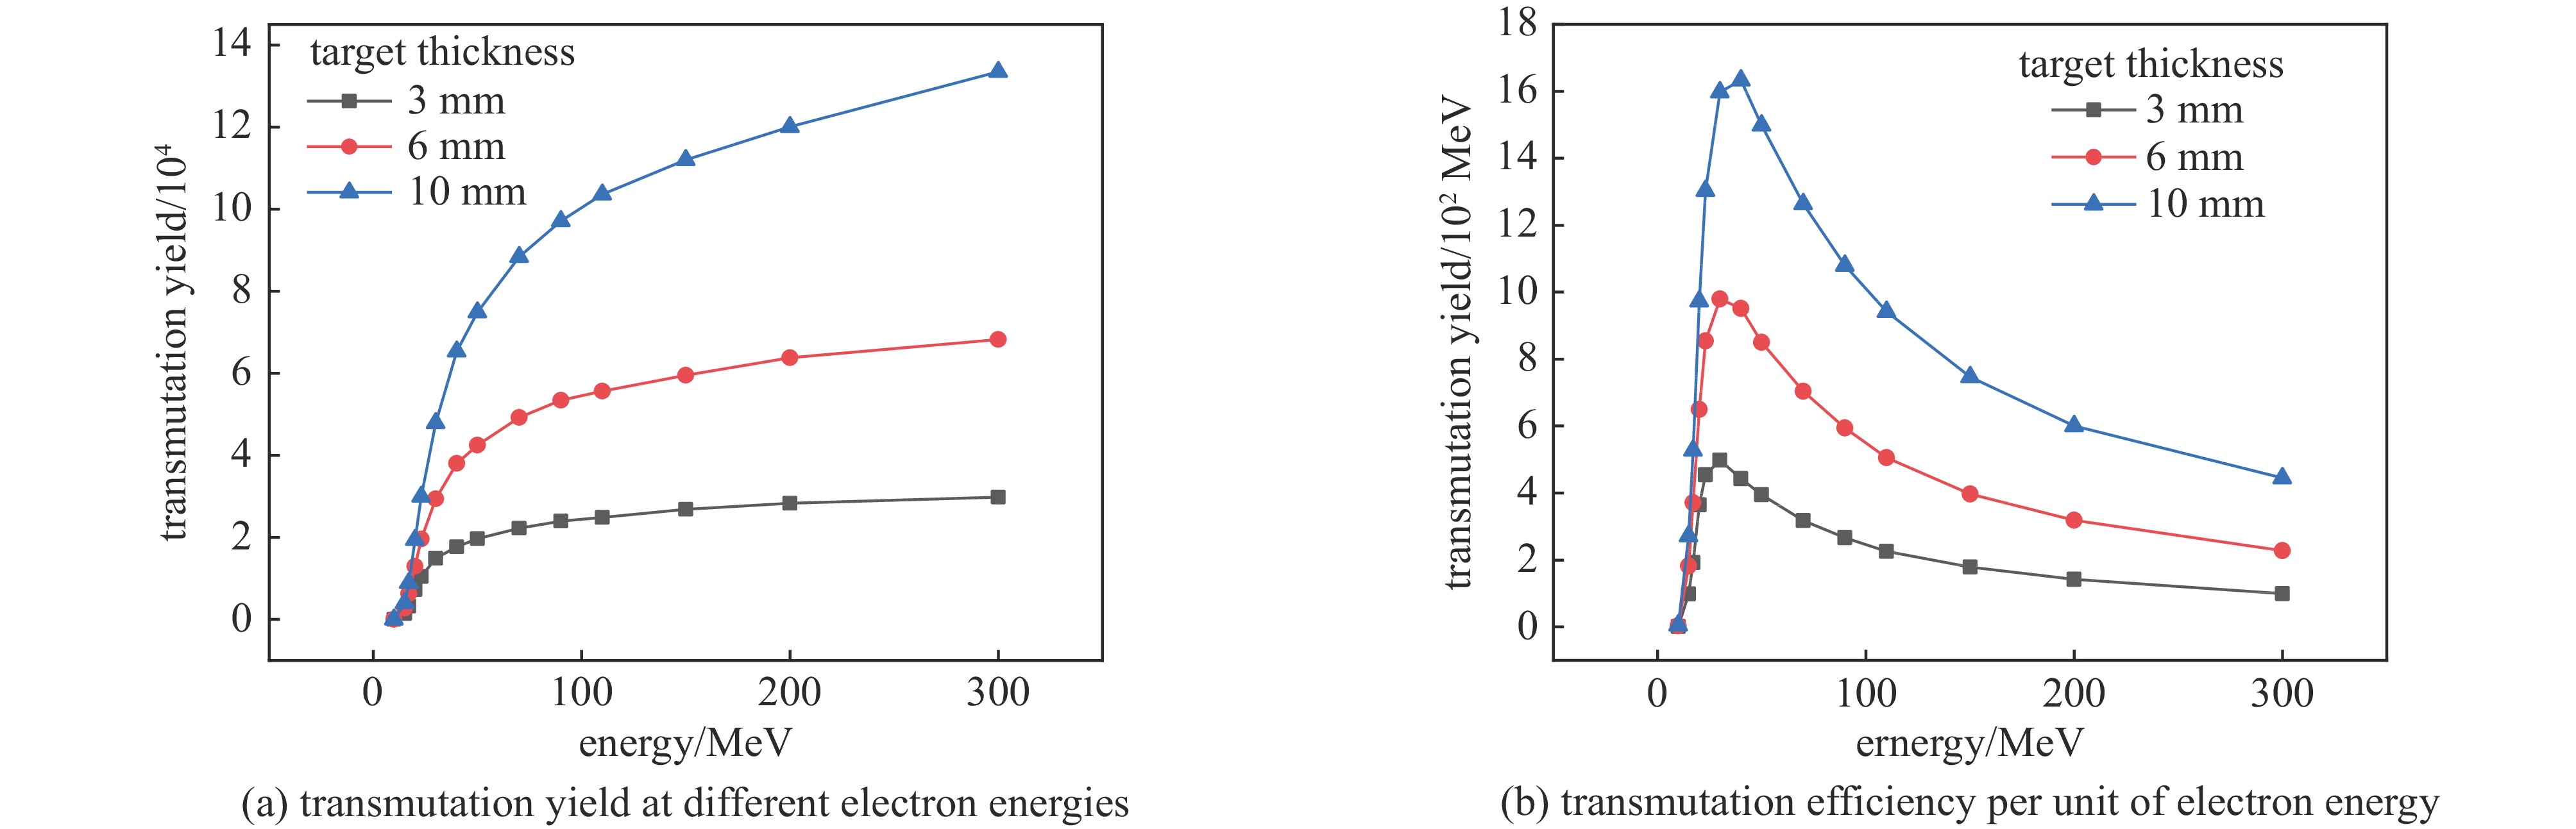 Transmutation yield and transmutation efficiency of different electron energy at the target thickness of 3 mm, 6 mm and 10 mm